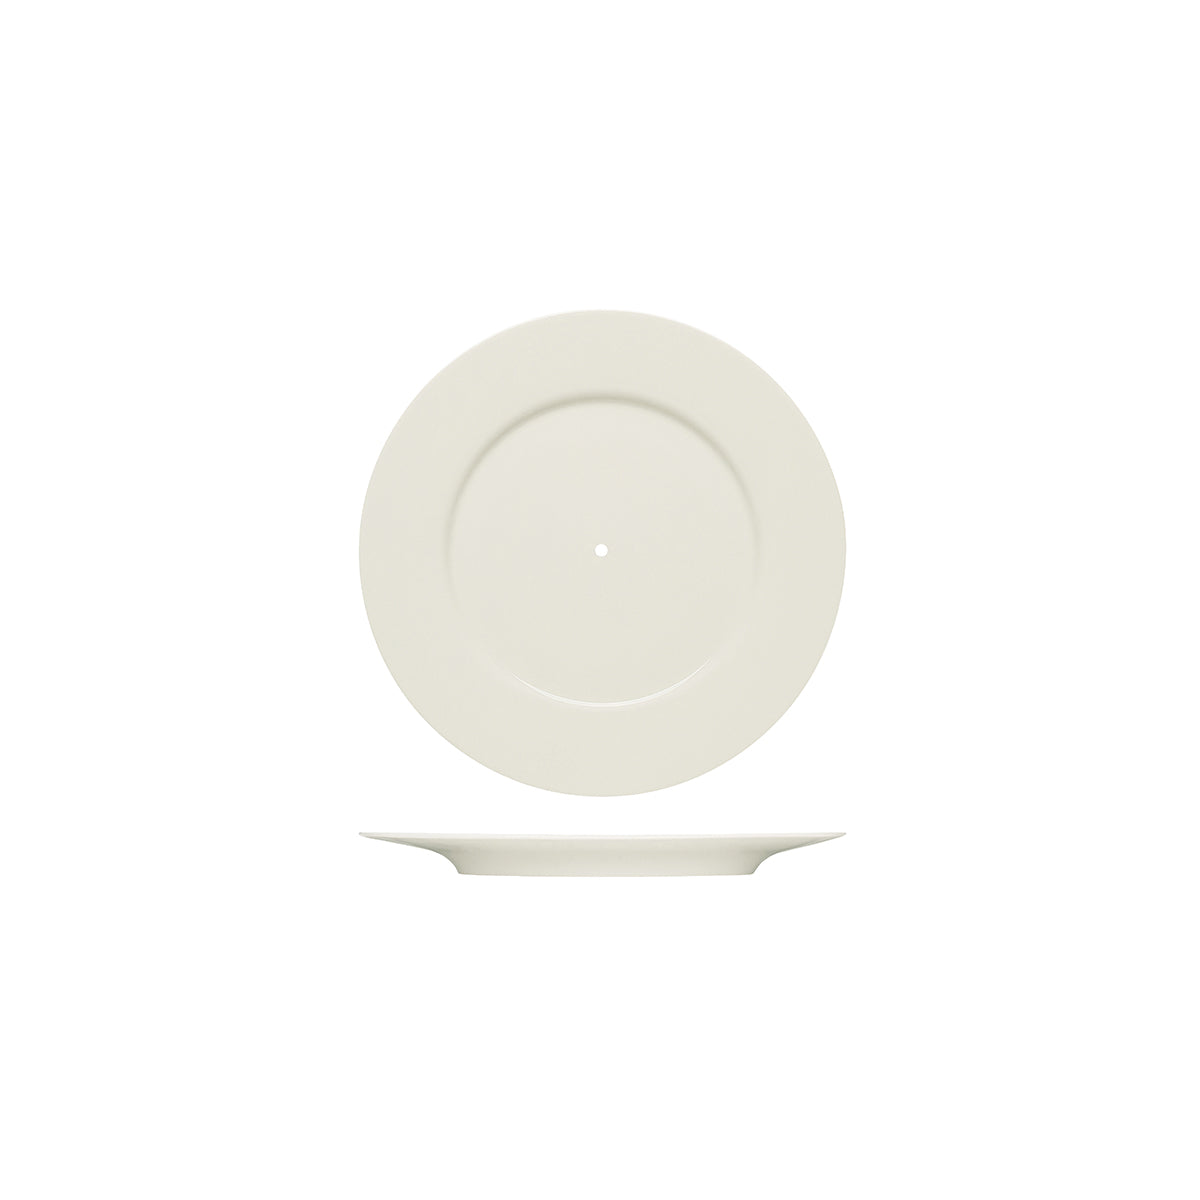 BHS6697201 Bauscher Bauscher Purity Round Plate with Wide Rim 220mm To Suit Serving Stand Tomkin Australia Hospitality Supplies